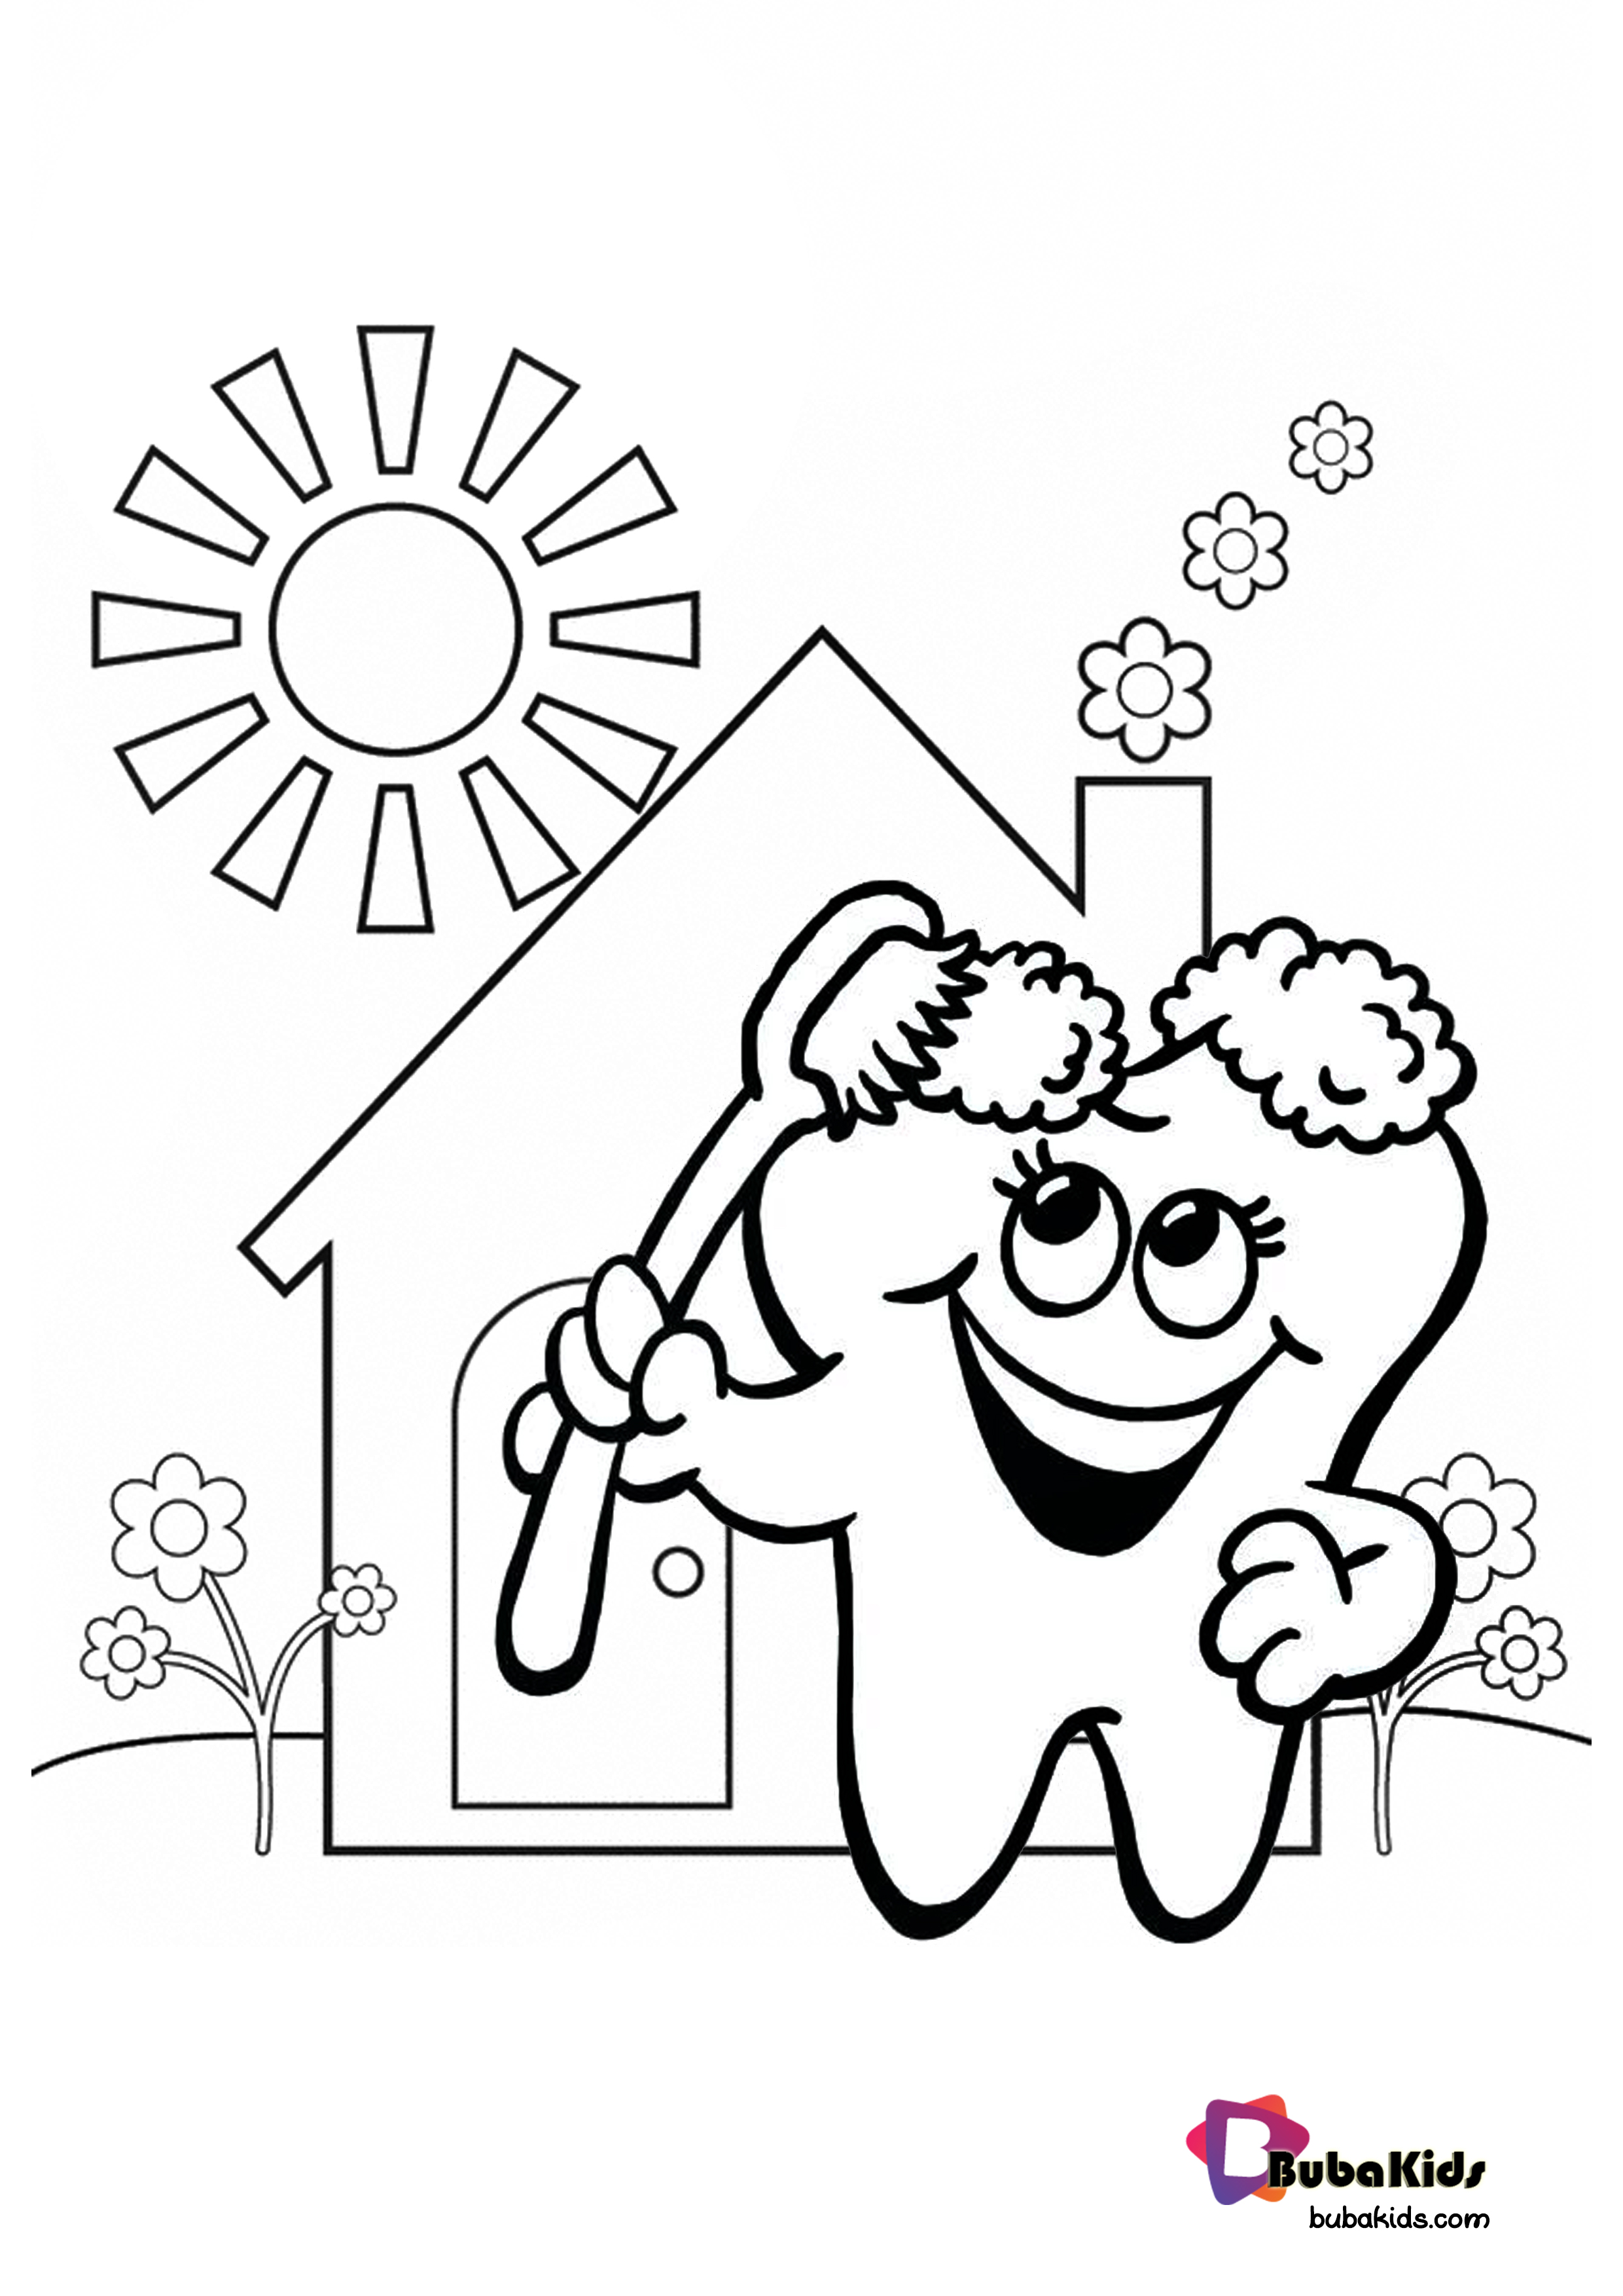 Kids Dental Coloring Pages only in Bubakids Wallpaper